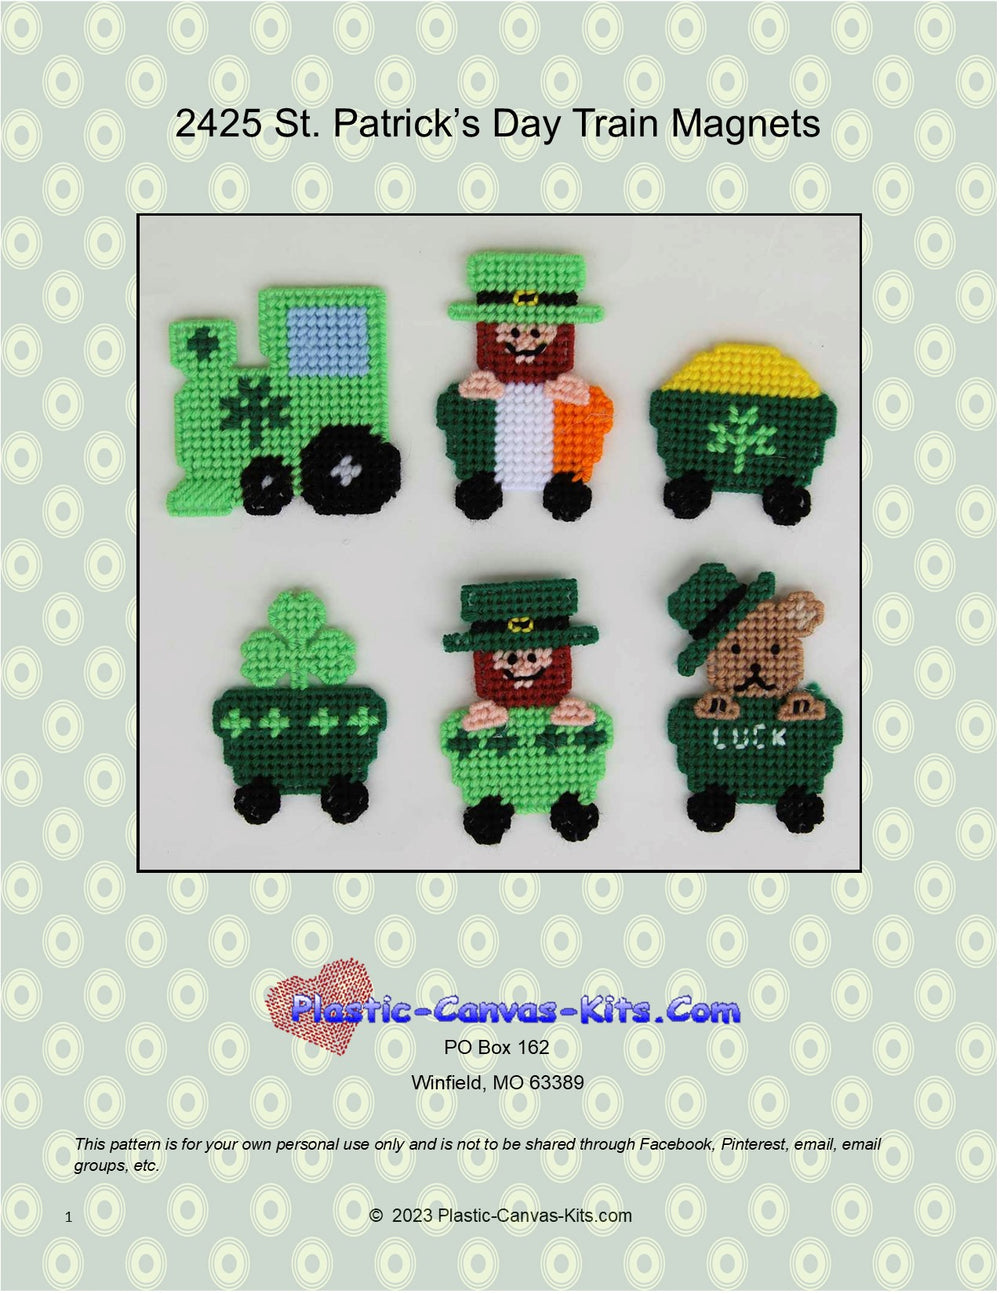 St. Patrick's Day Train Magnets